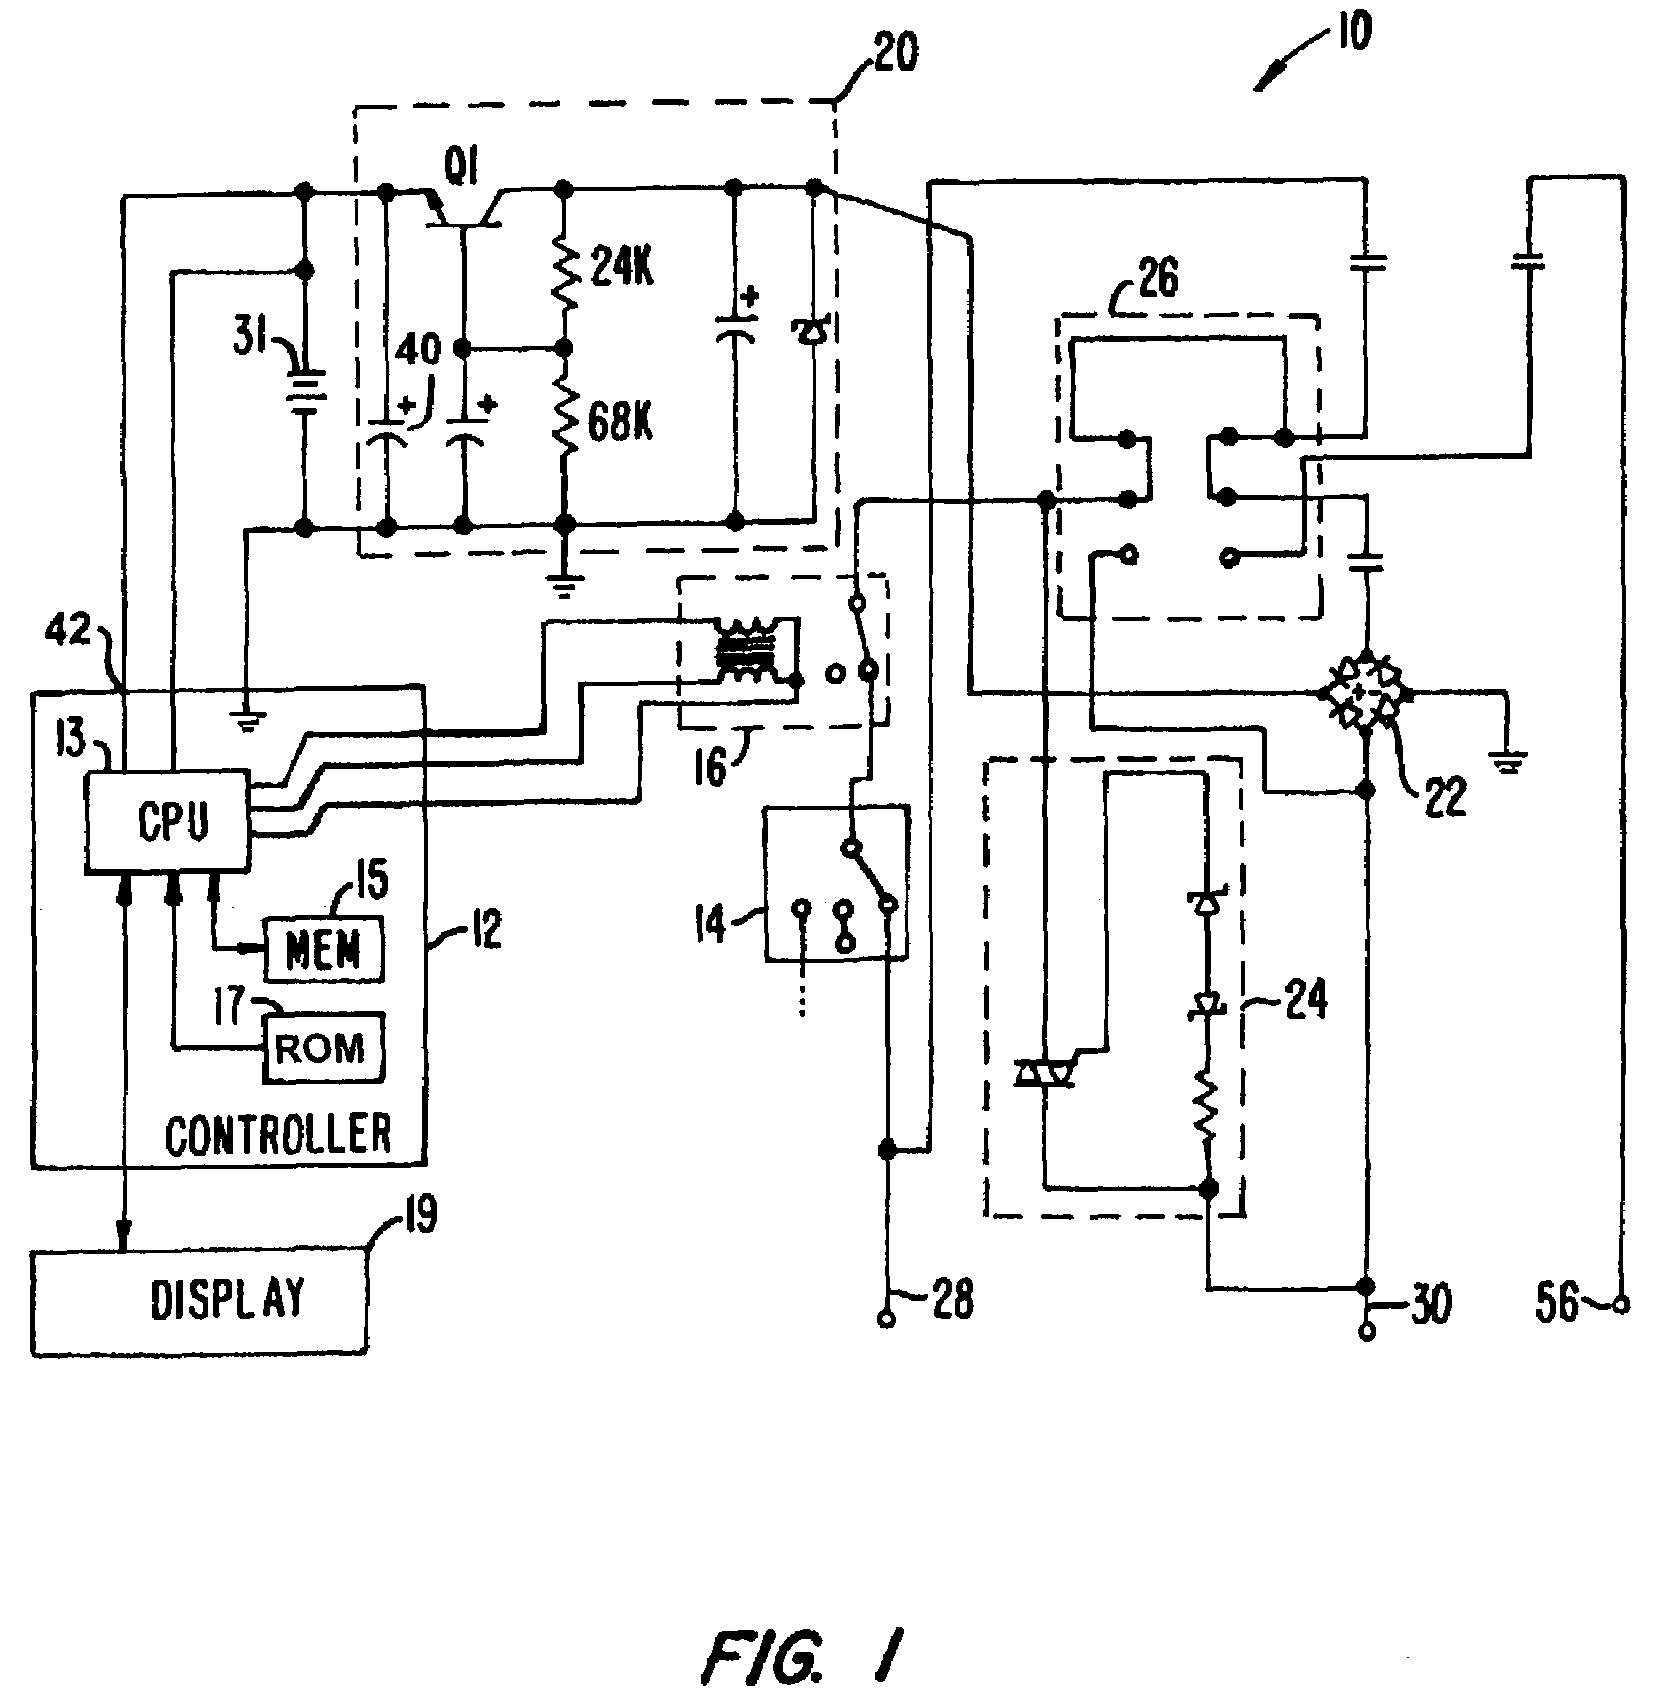 Thermostat with touch-screen display